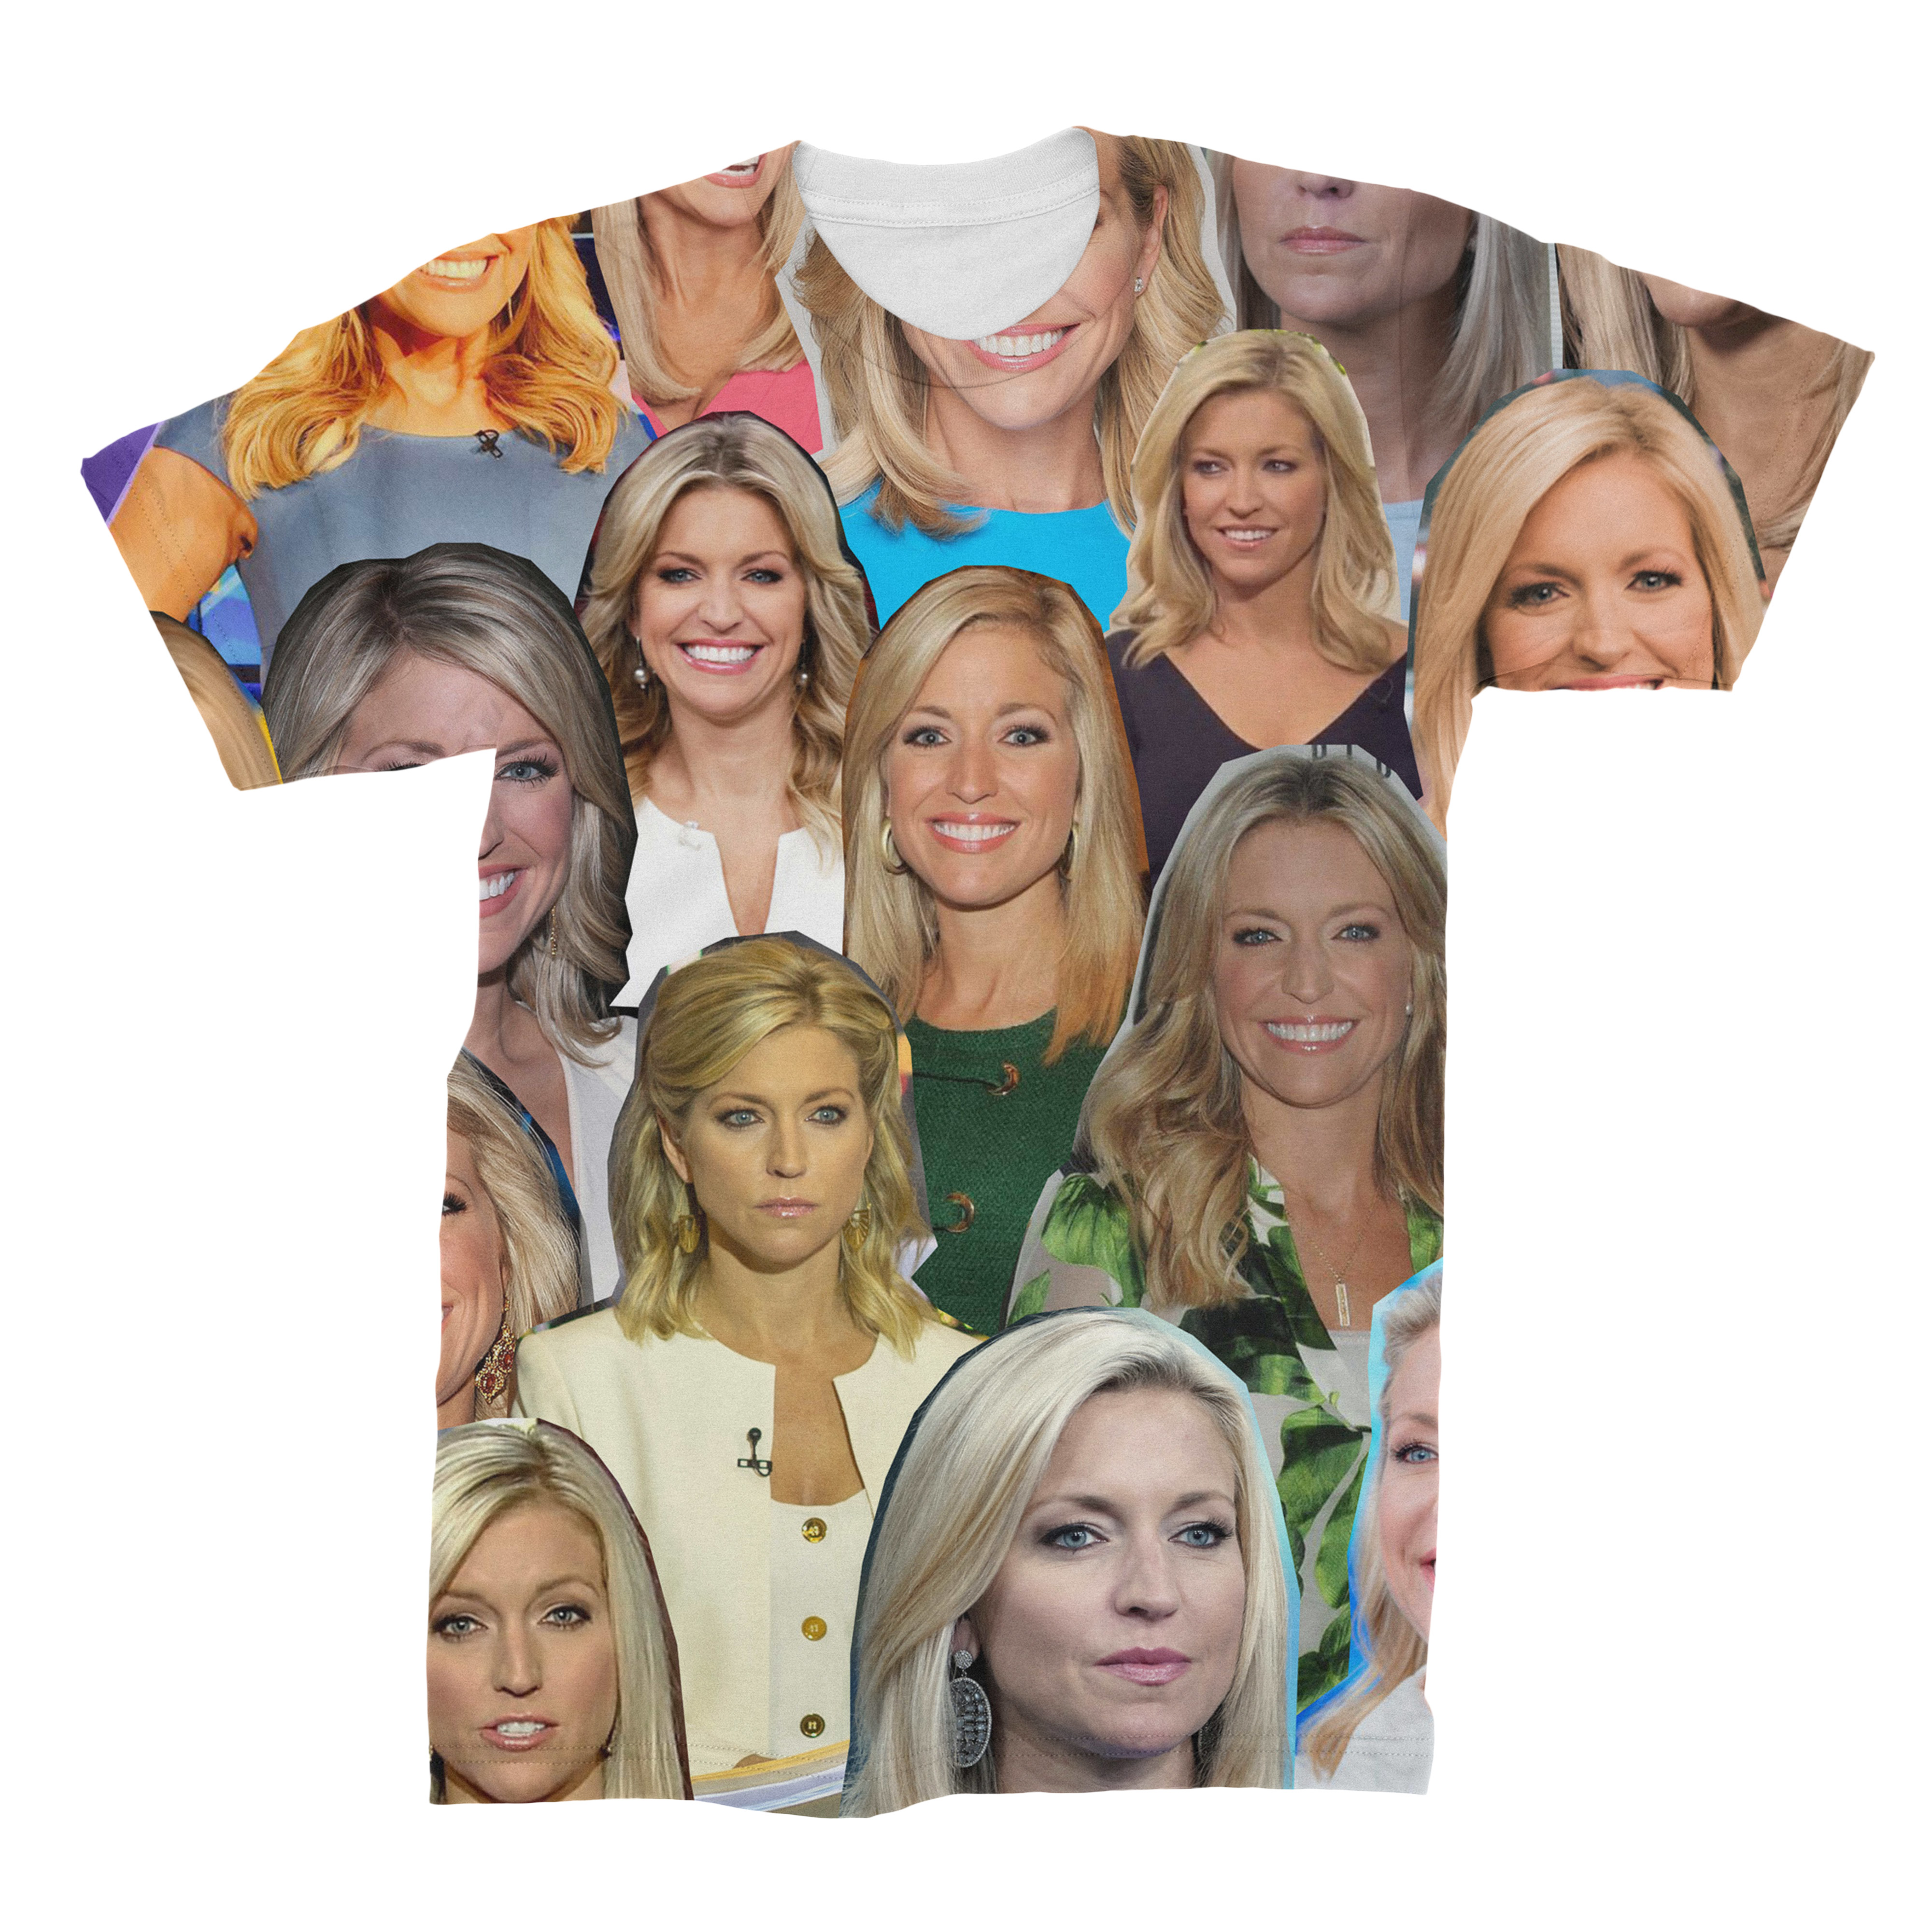 Ainsley Earhardt Photo Collage T-Shirt - Subliworks